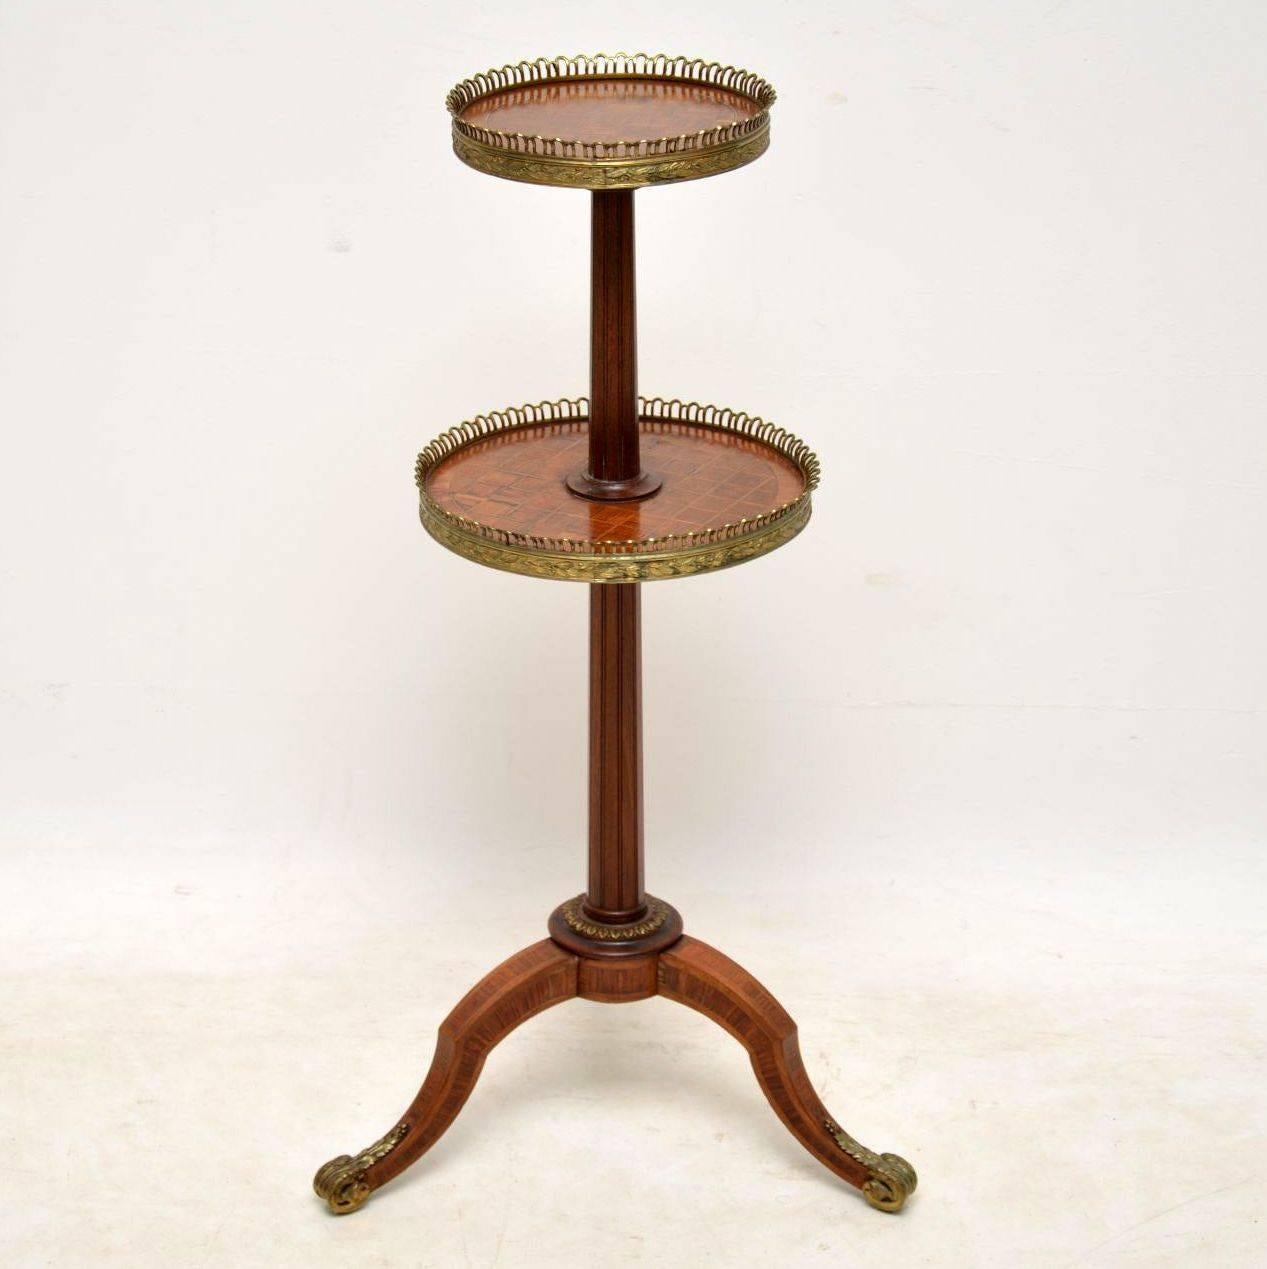 Antique French two-tiered étagère with kingwood parquetry, inlays and gilt bronze mounts of exceptional quality. It has a fluted central column and sits on tripod legs. There are kingwood panels on the tops and sides of the tripod legs. This table